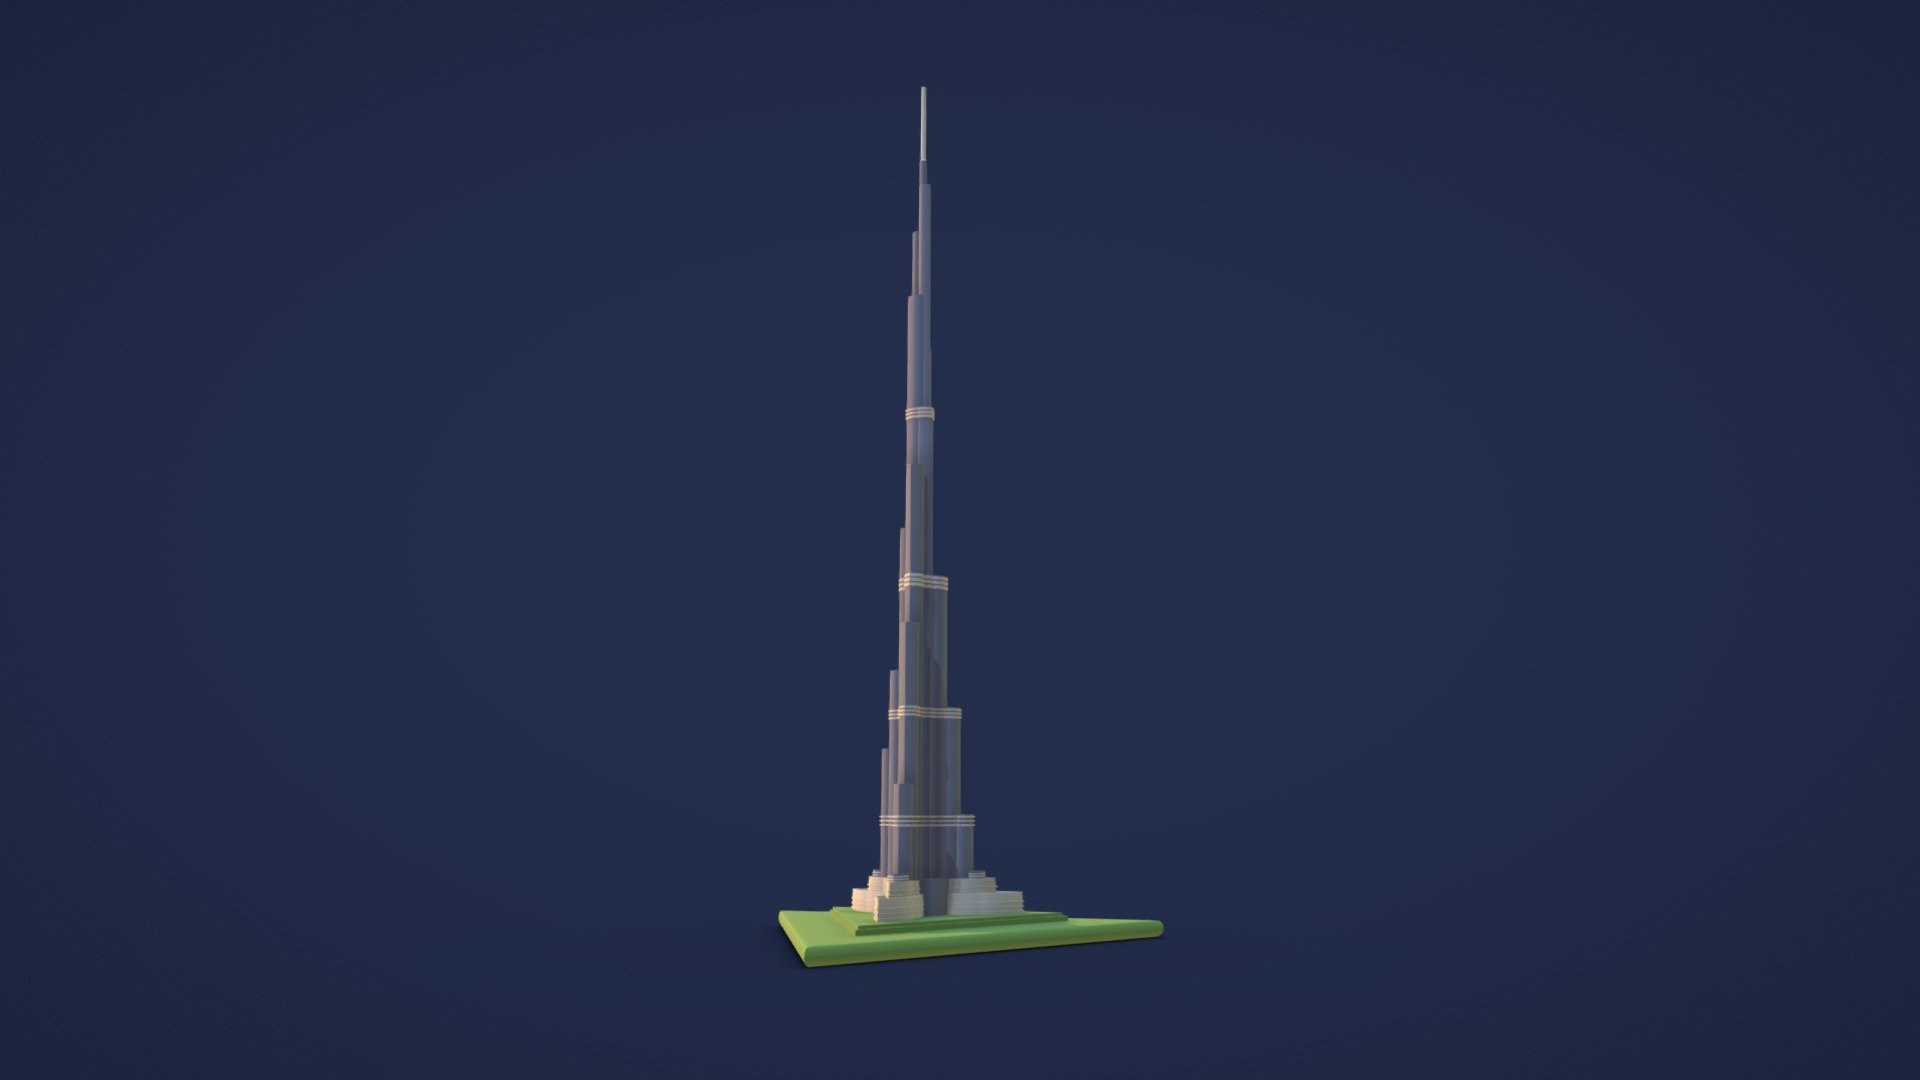 General:





skyscrapers in Dubai




cartoon world scale poly




Made entirely in Blender 2.93




Unique and simple shapes for 3D models.




The model is ready for 3D printing.




Cartoon Low Poly Burj Khalifa Dubai Landmark Scene




The height of this skyscraper is sharp



The zip archive:





Includes 3d format: BLEND / OBJ / FBX




texture




materials




Download at 525kB



Hope you like it.
If you have any question please free to contact me 3d model